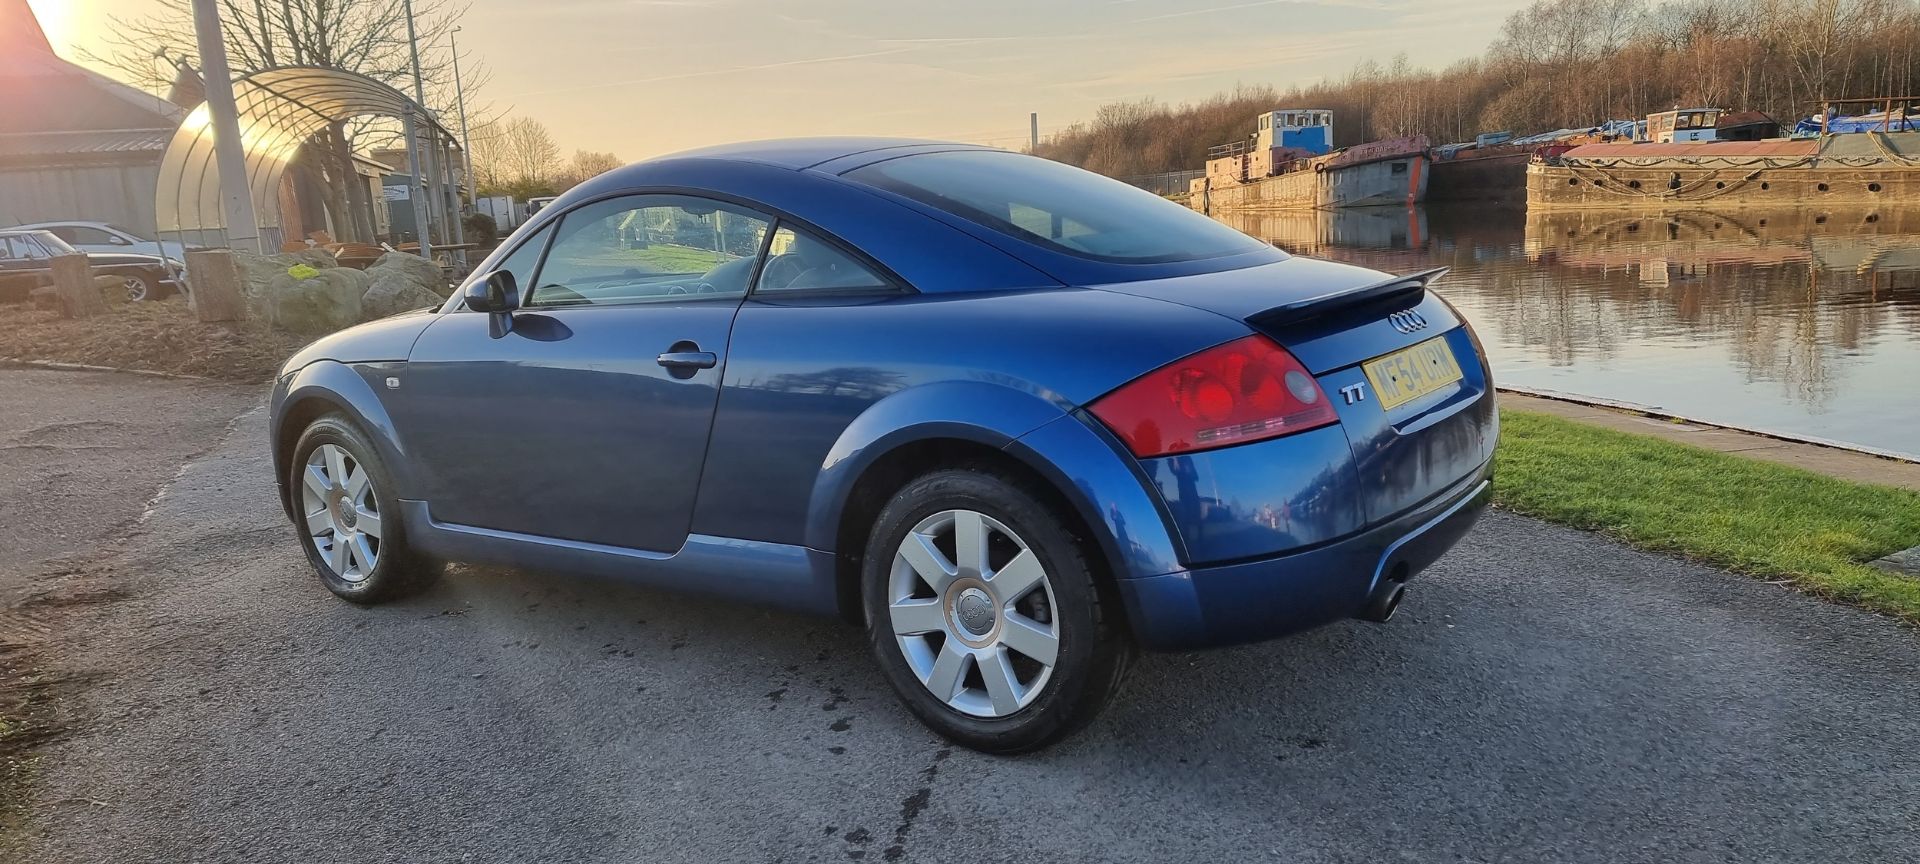 2004 Audi TT Coupe, 180hp, 1781cc. Registration number MF54 URM. Engine number TRUZZZ8N651005485. - Image 6 of 18